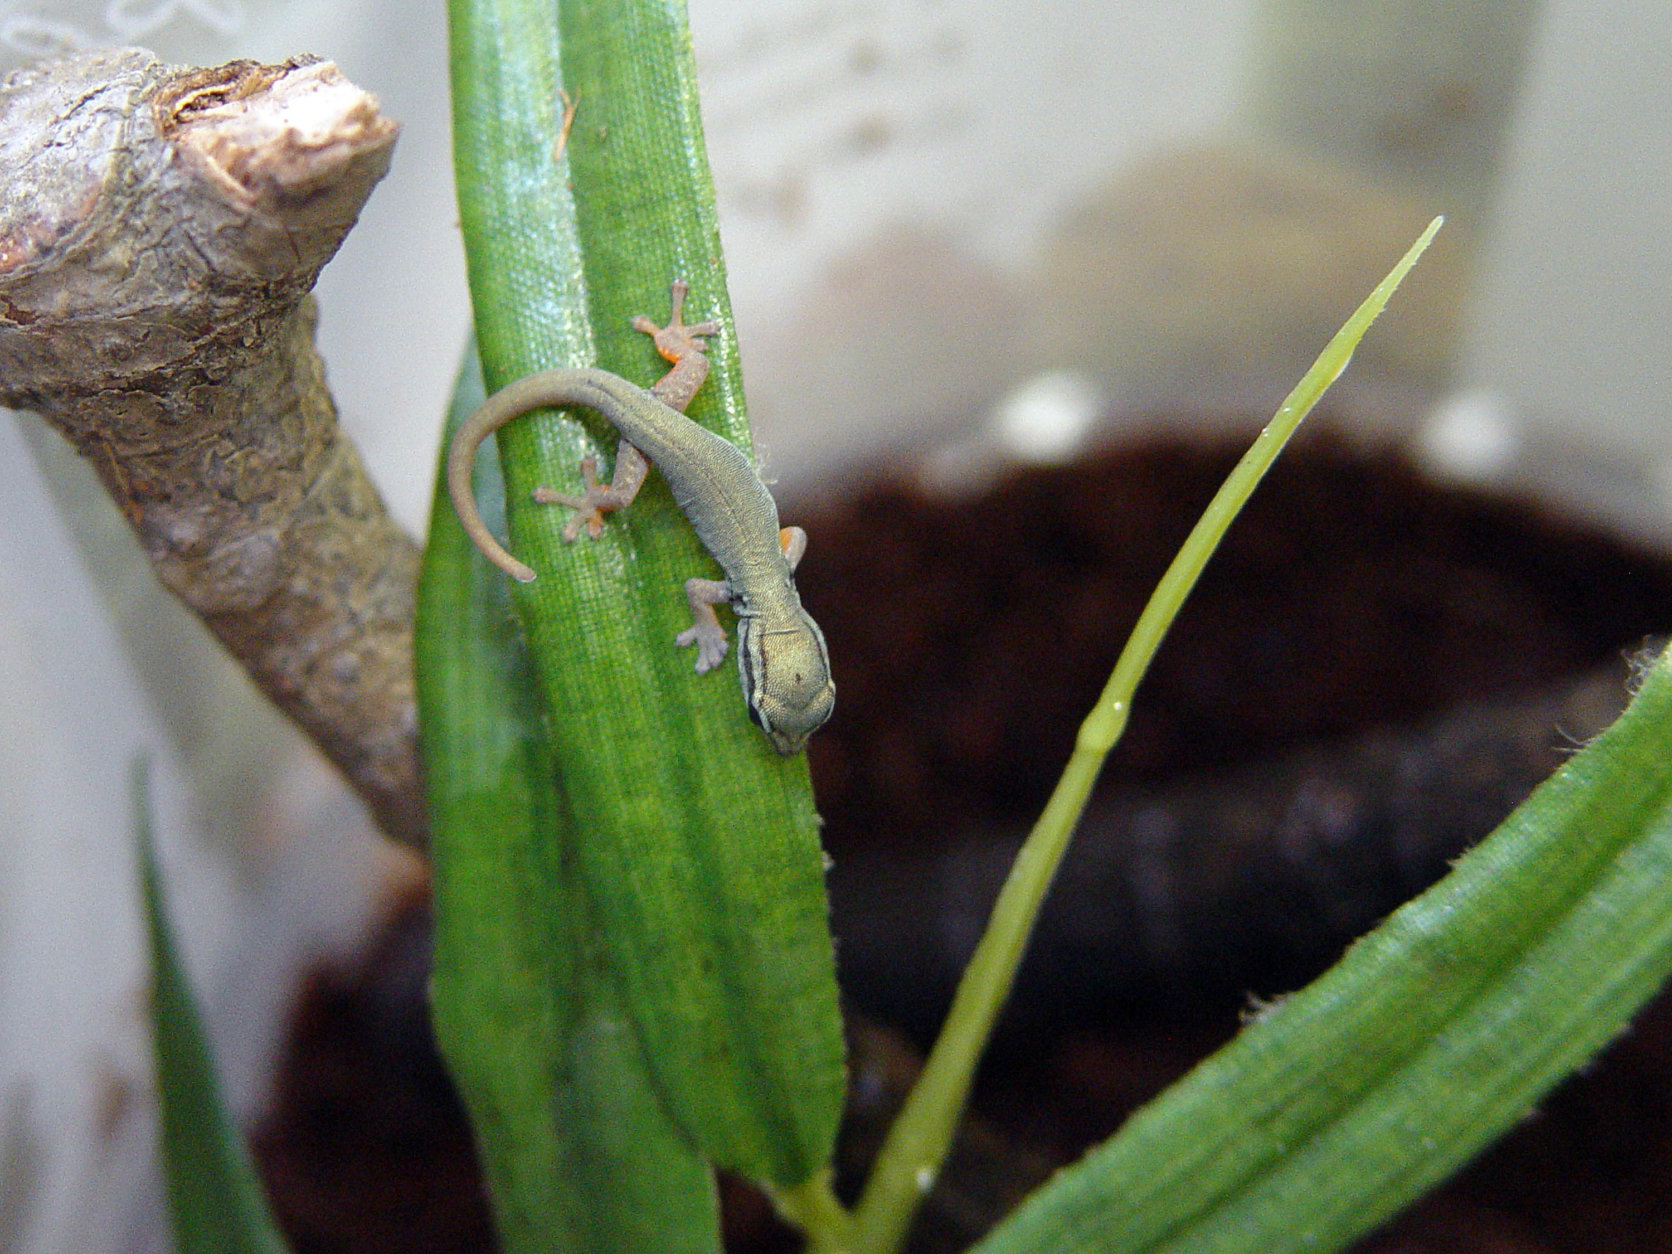 In a July 9, 2011 photo, a tiny William's dwarf geckos makes itself at home at the Virginia Zoo in Norfolk. Two of the tiny geckos hatched at the zoo on July 7.  At roughly an inch long, it is still too early to determine if the tiny babies are male or female. They will be reared at an off-exhibit enclosure. (AP Photo/Virginia Pilot via Virgiinia Zoo, Craig Pelke)